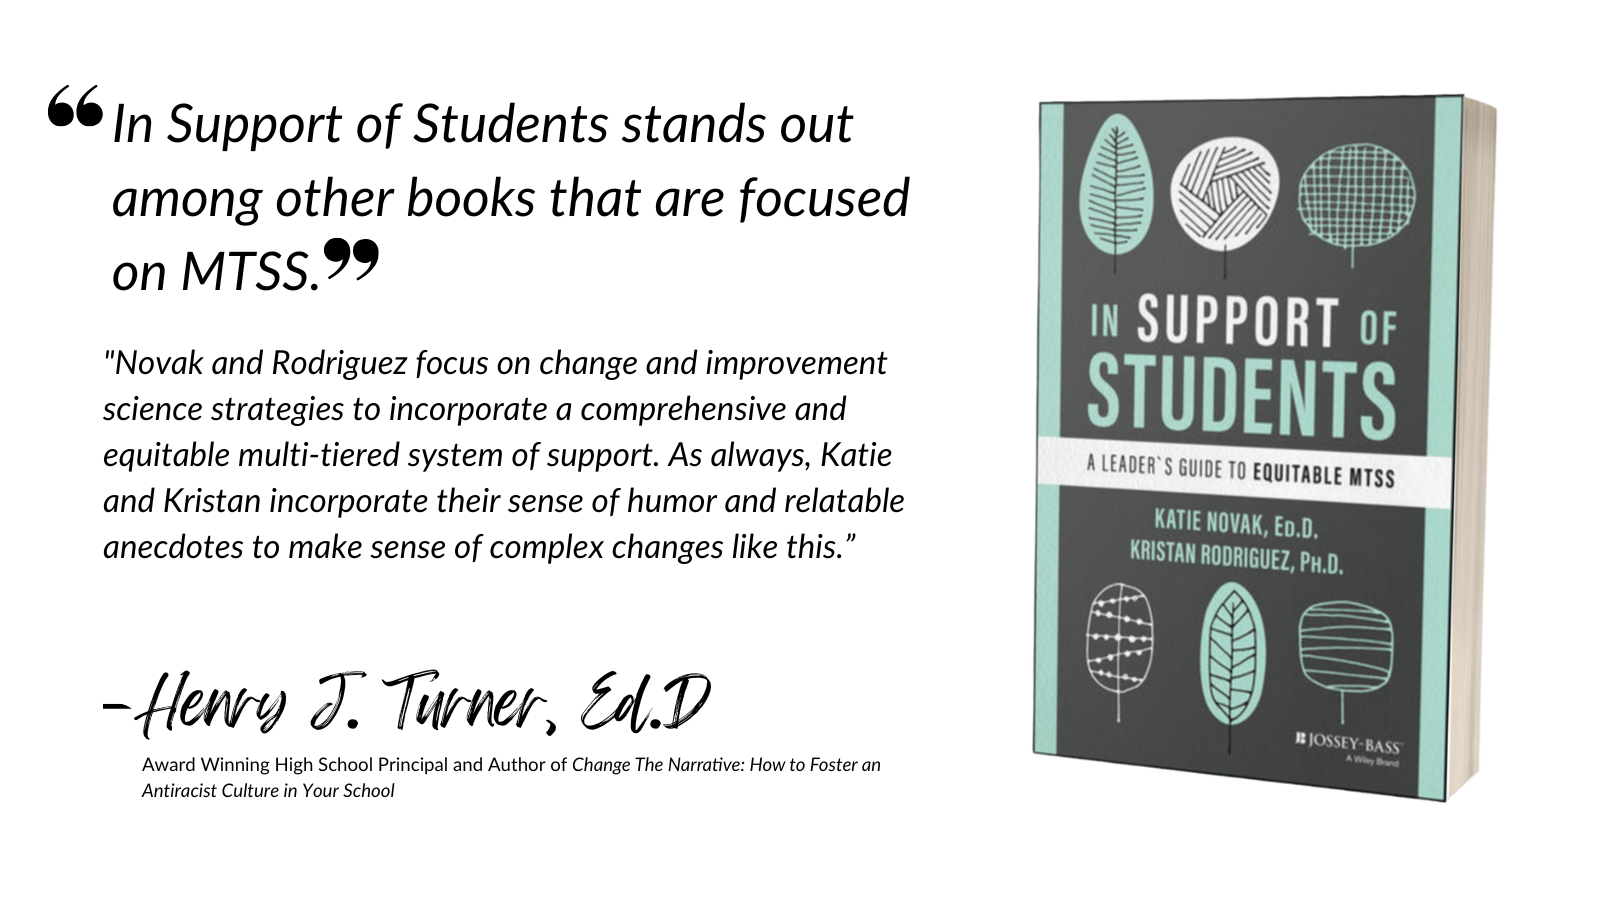 In support of student stands out amongst other mtss books